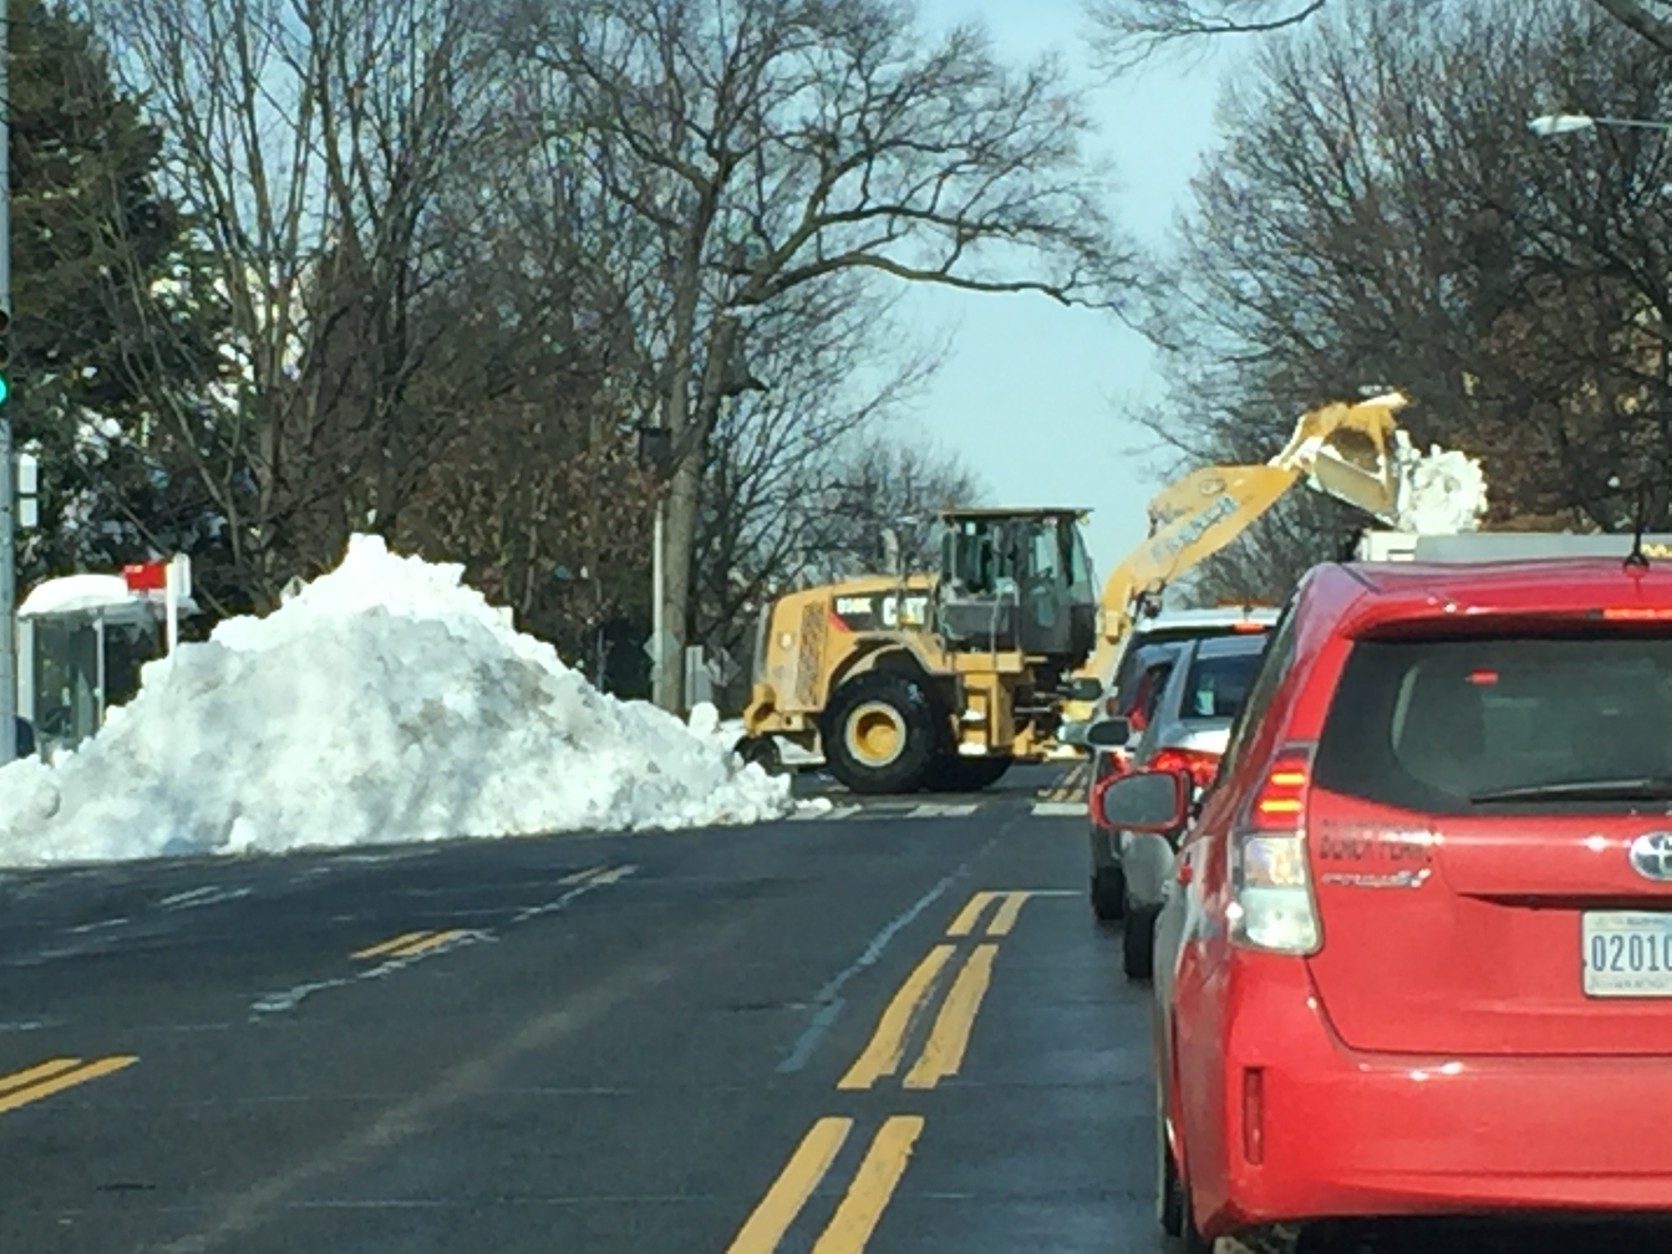 Crews work on a massive pile of snow on Connecticut Avenue in Washington, D.C. (WTOP/Rich Johnson)